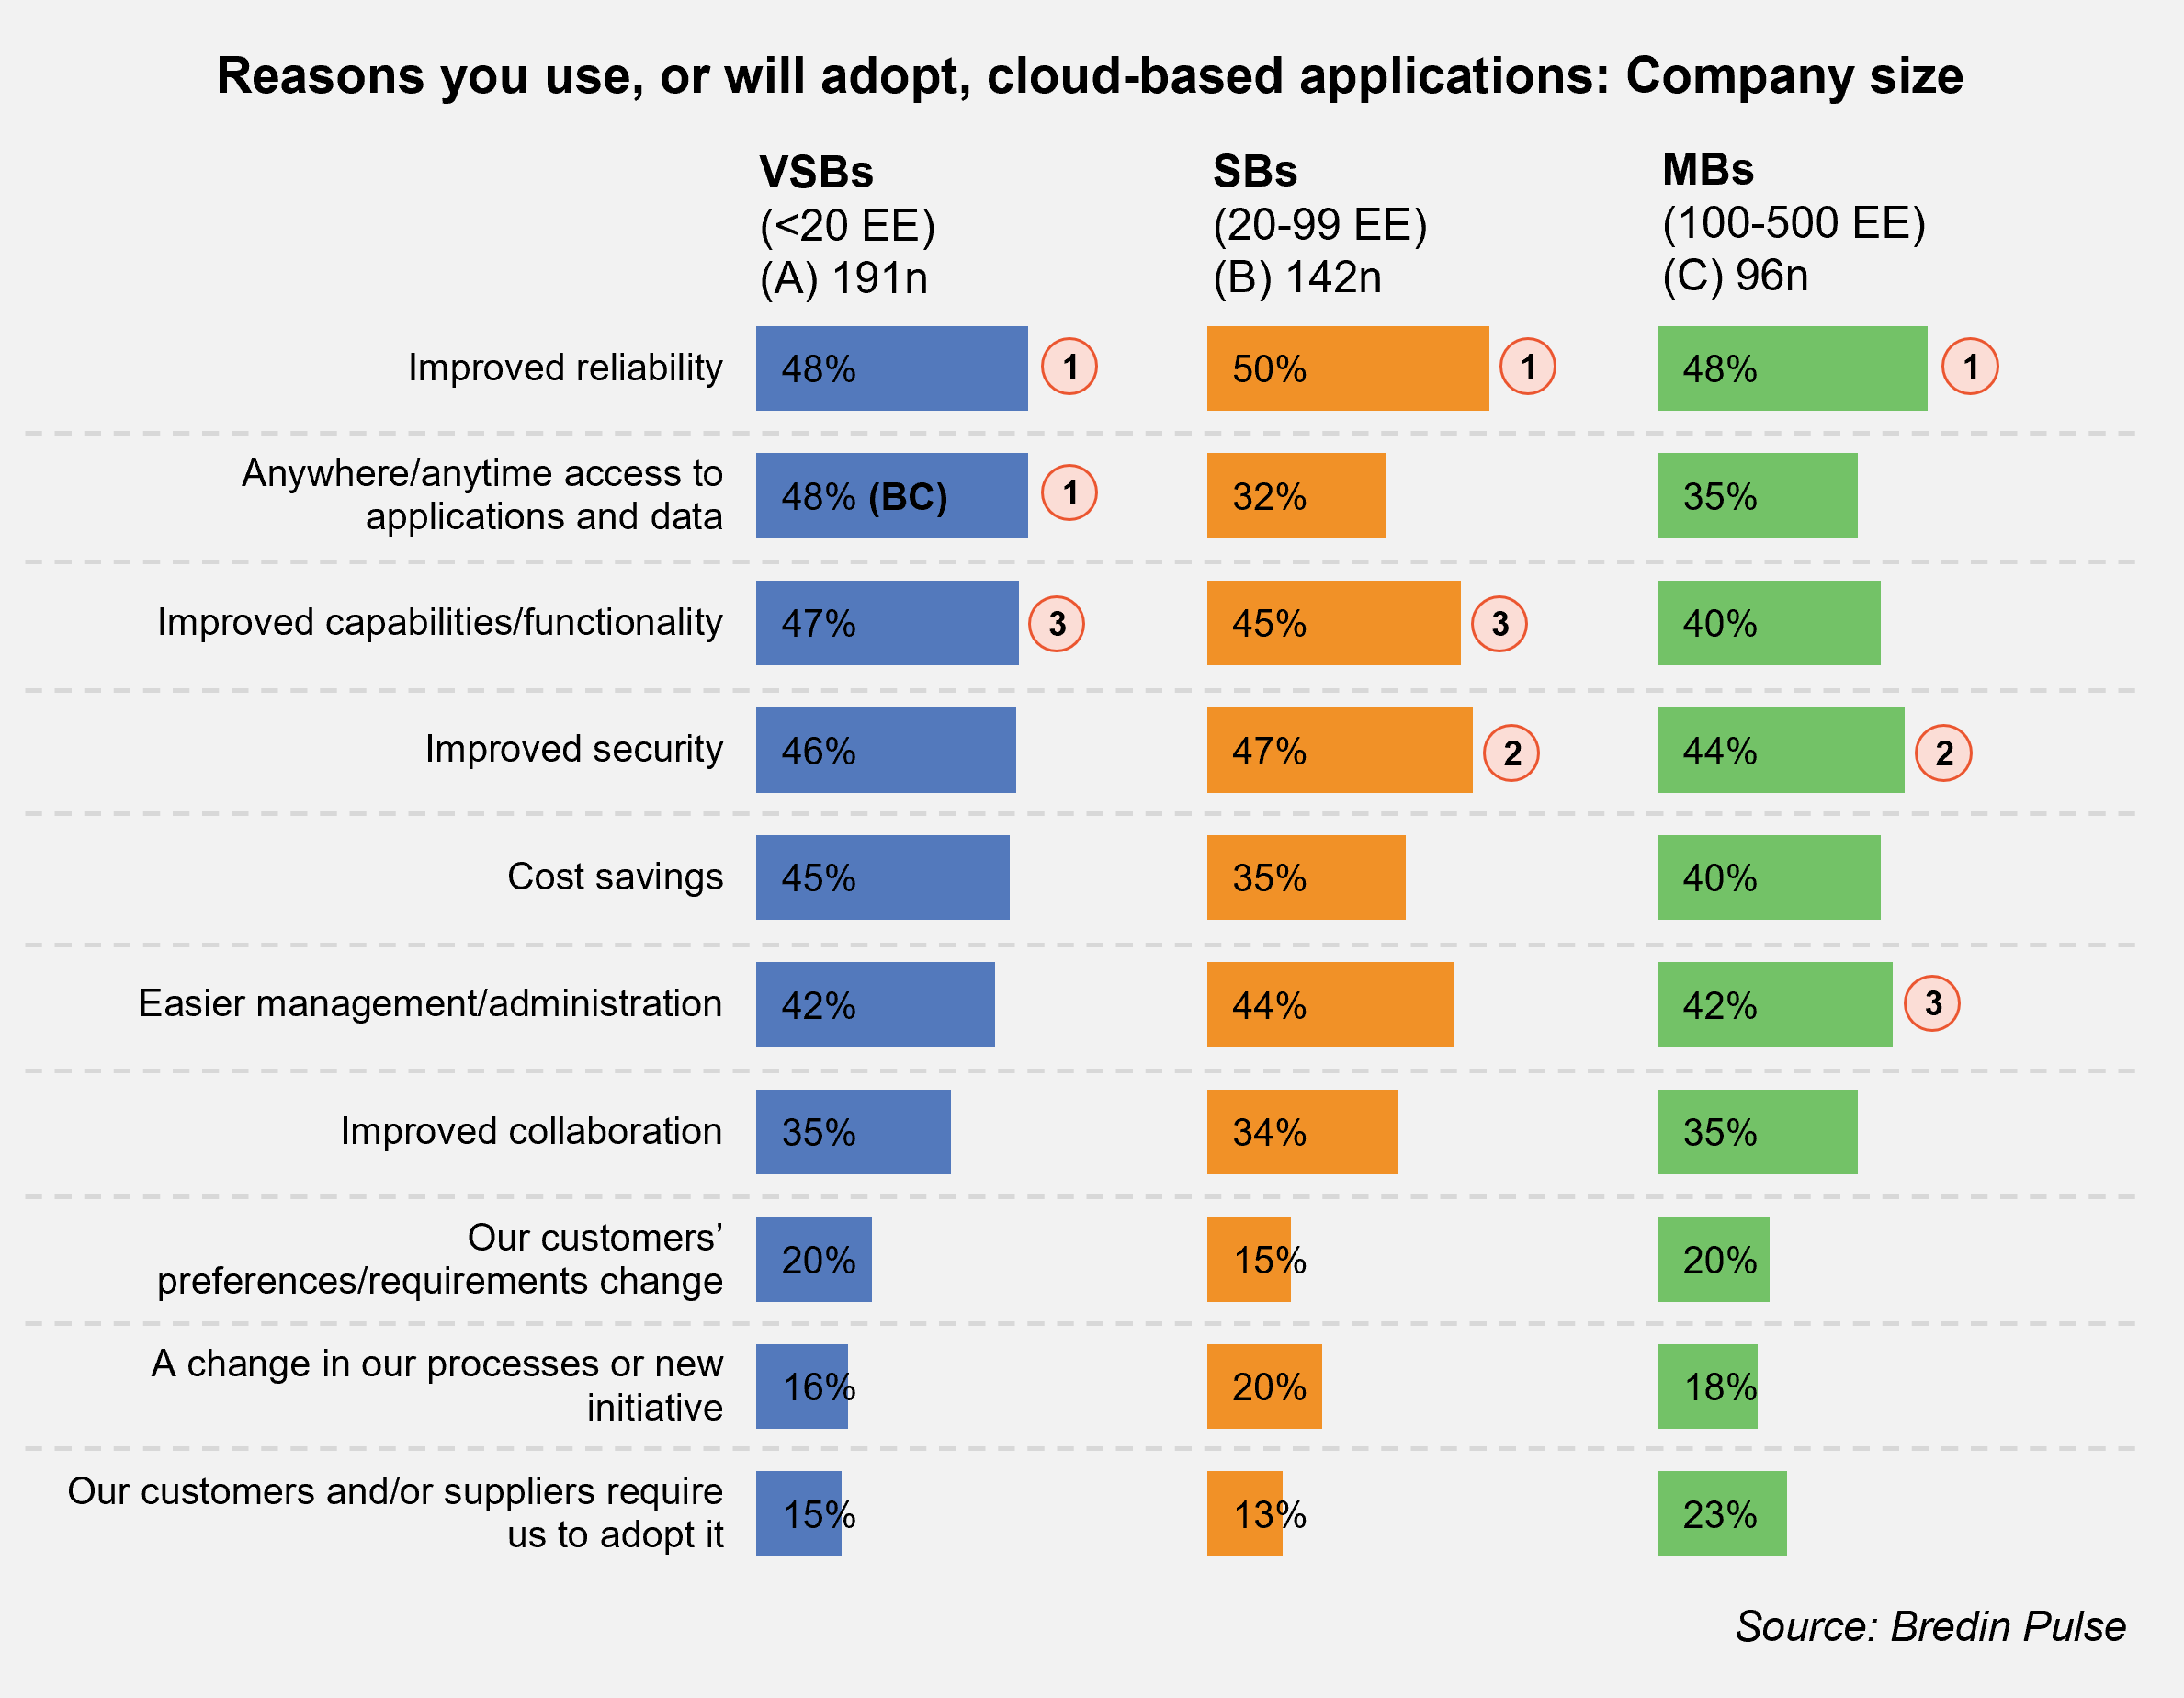 Reasons you use, or will adopt, cloud-based applications - Company size